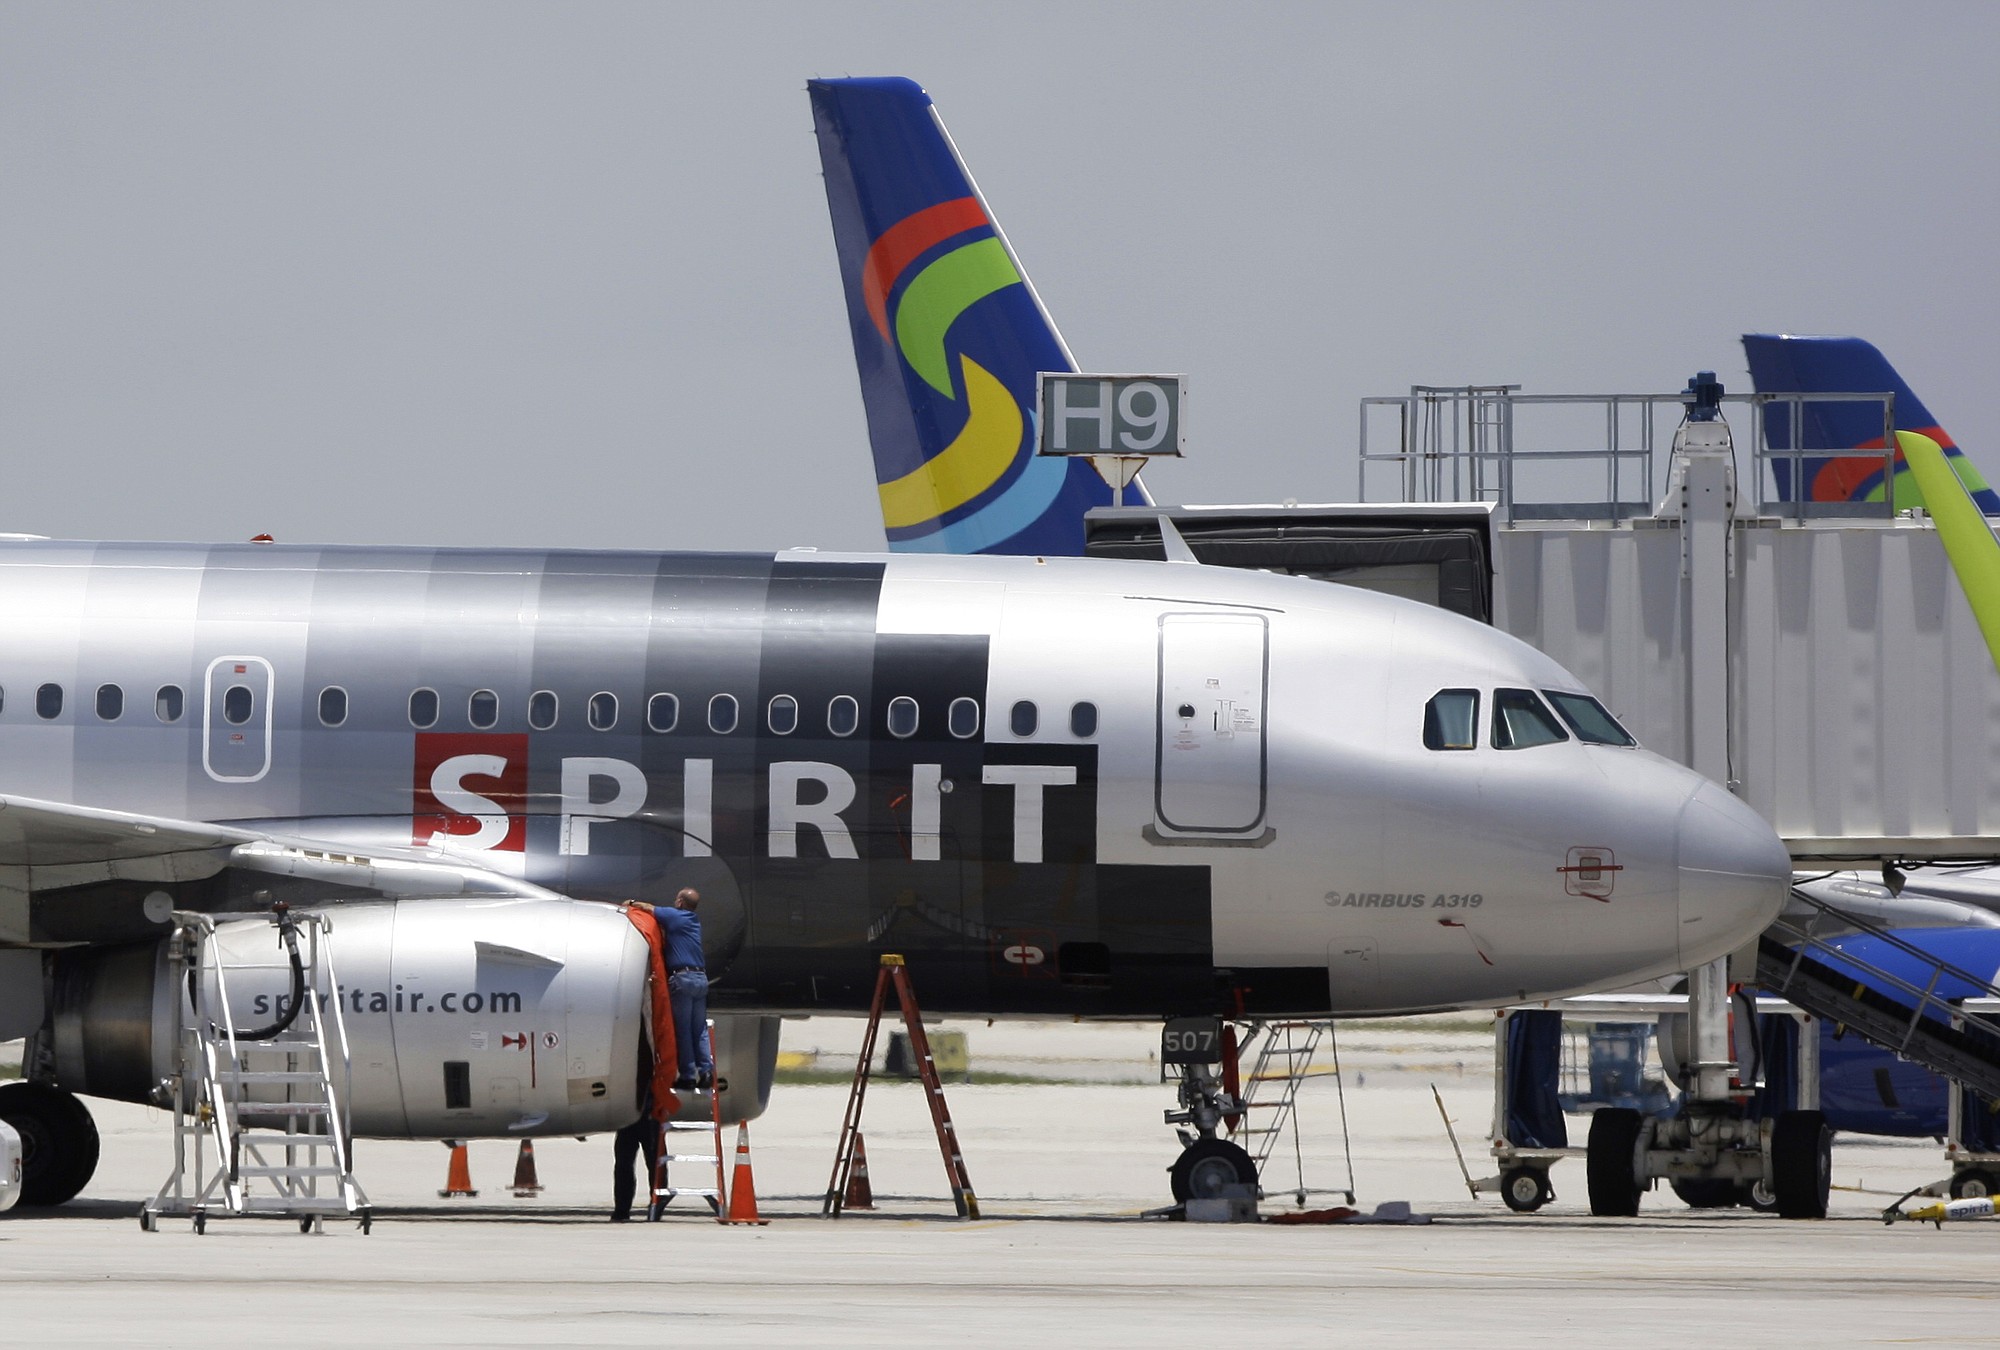 Associated Press files
Spirit, a low-fare, high-fees carrier with a clientele of mostly leisure travelers, had by far the worst on-time performance in June among 14 airlines tracked in a government report released Tuesday.